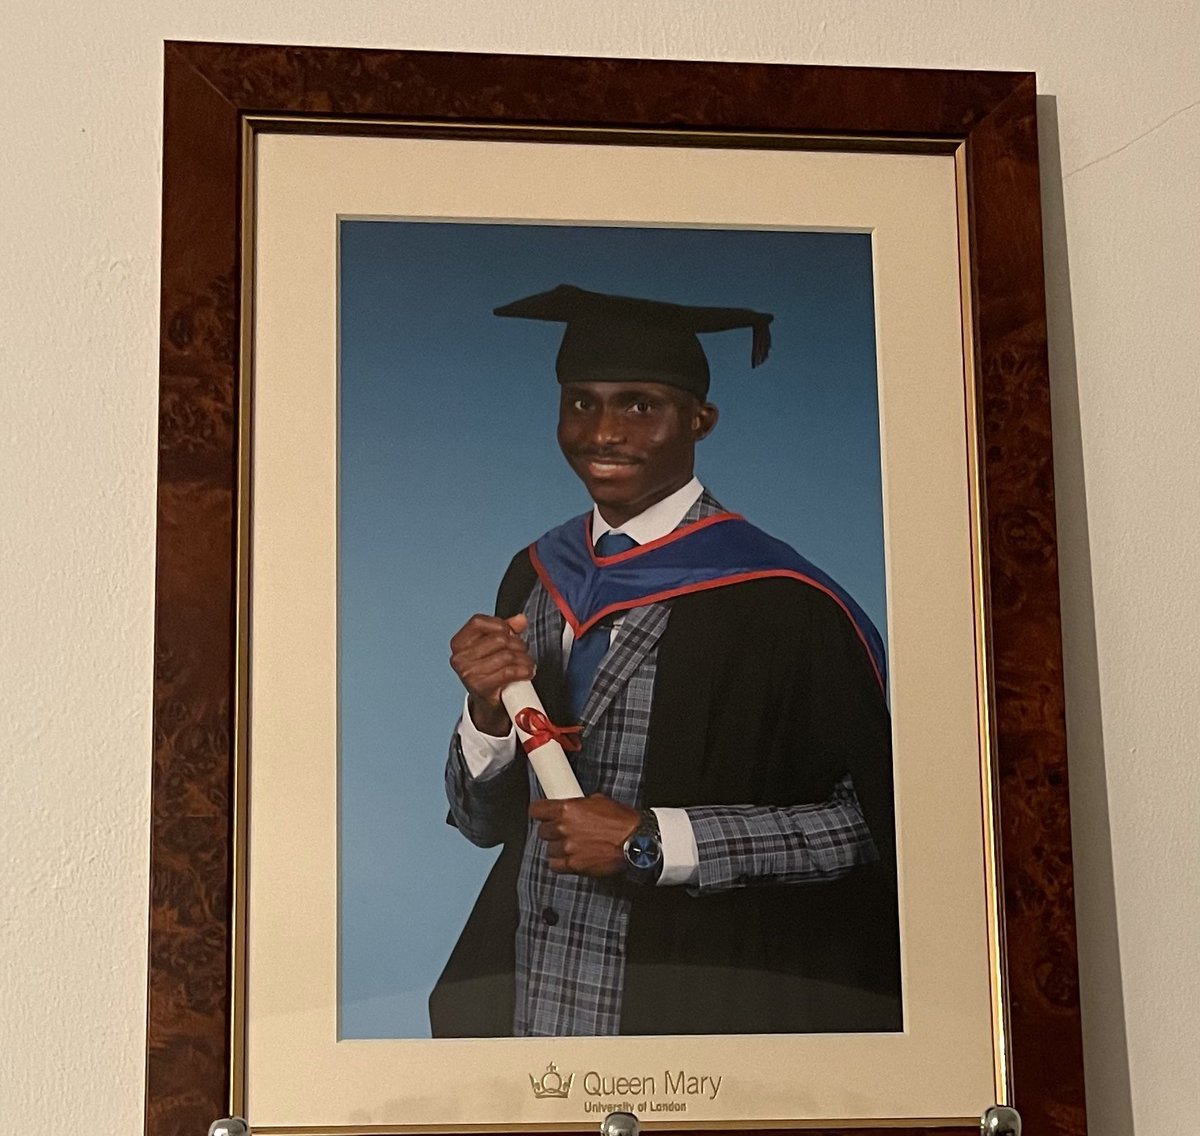 Wall of fame (frame) 😁! Forever grateful to God! Thank you @commschols ! Thank you @QMULBartsTheLon ! Thank you @QM_GlobalHealth ! Thank you @QMUL ! Proudly an alumnus!